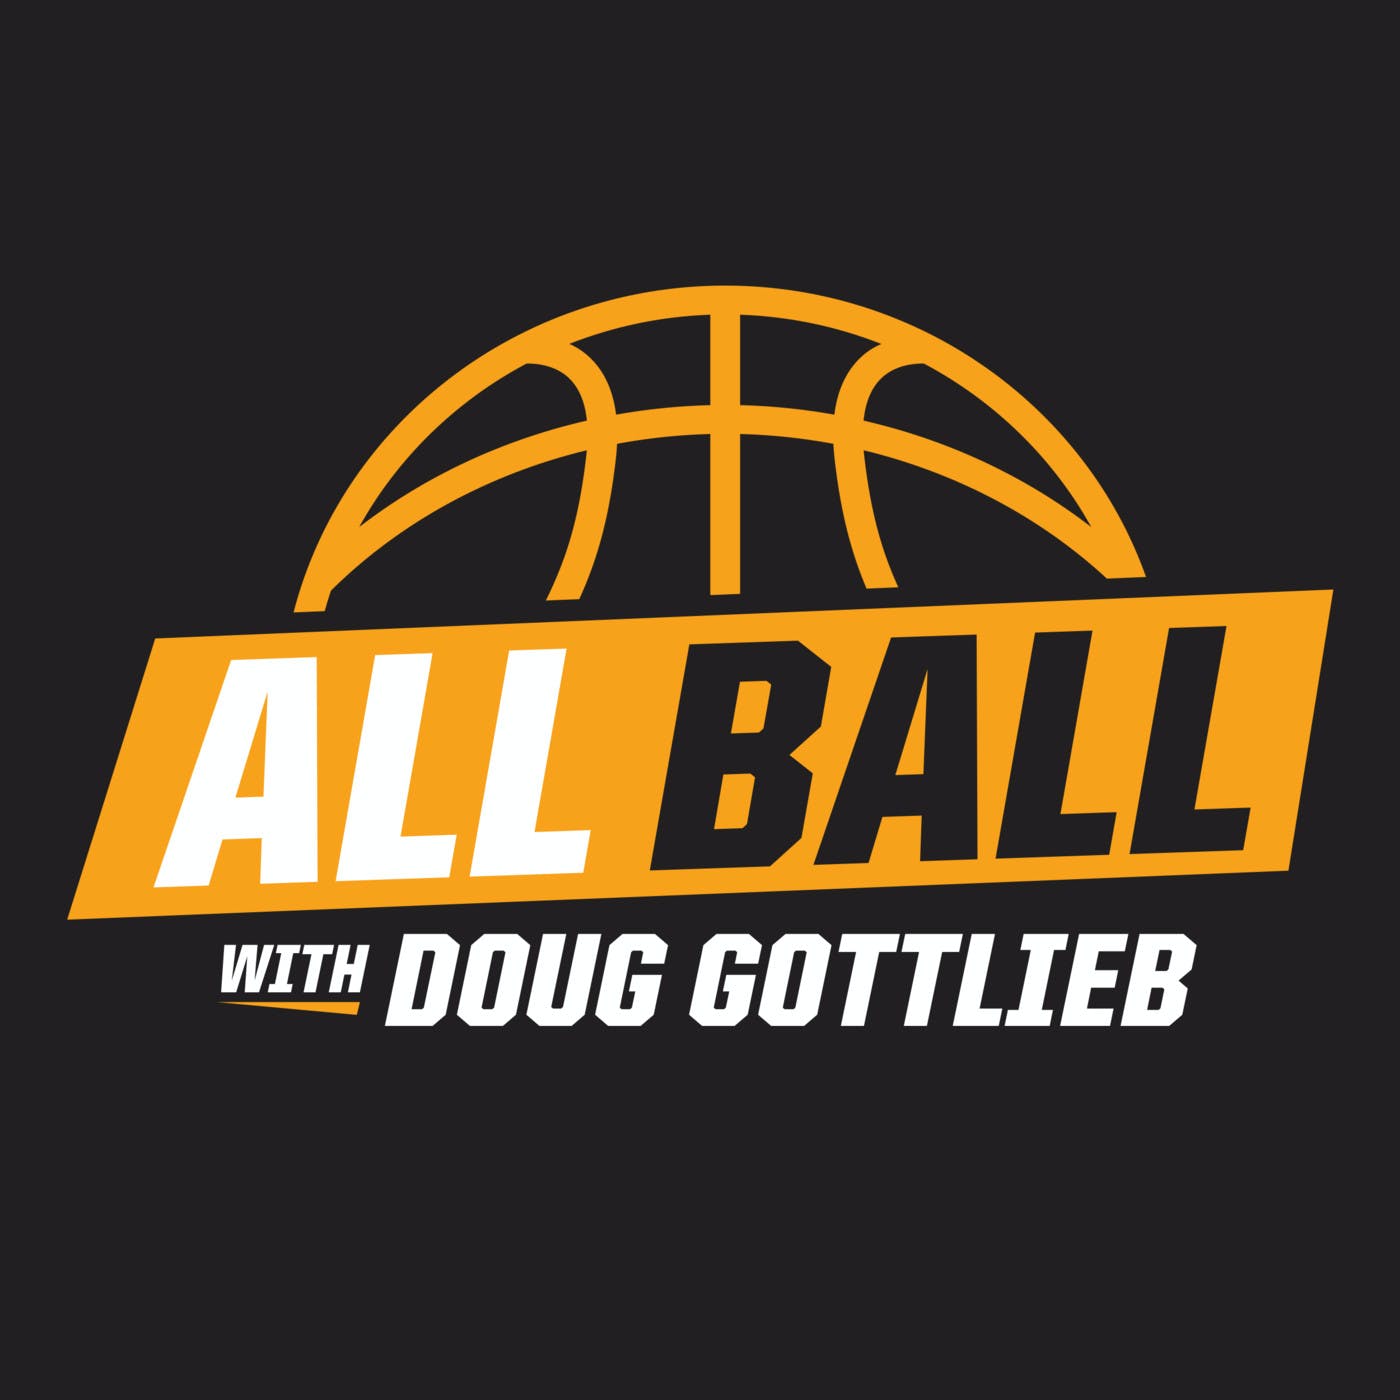 Gottlieb: UCLA coaching search; Kyle Kuzma's potential; Guest - Rusty LaRue on playing with Duncan, MJ, and making the '98 Bulls